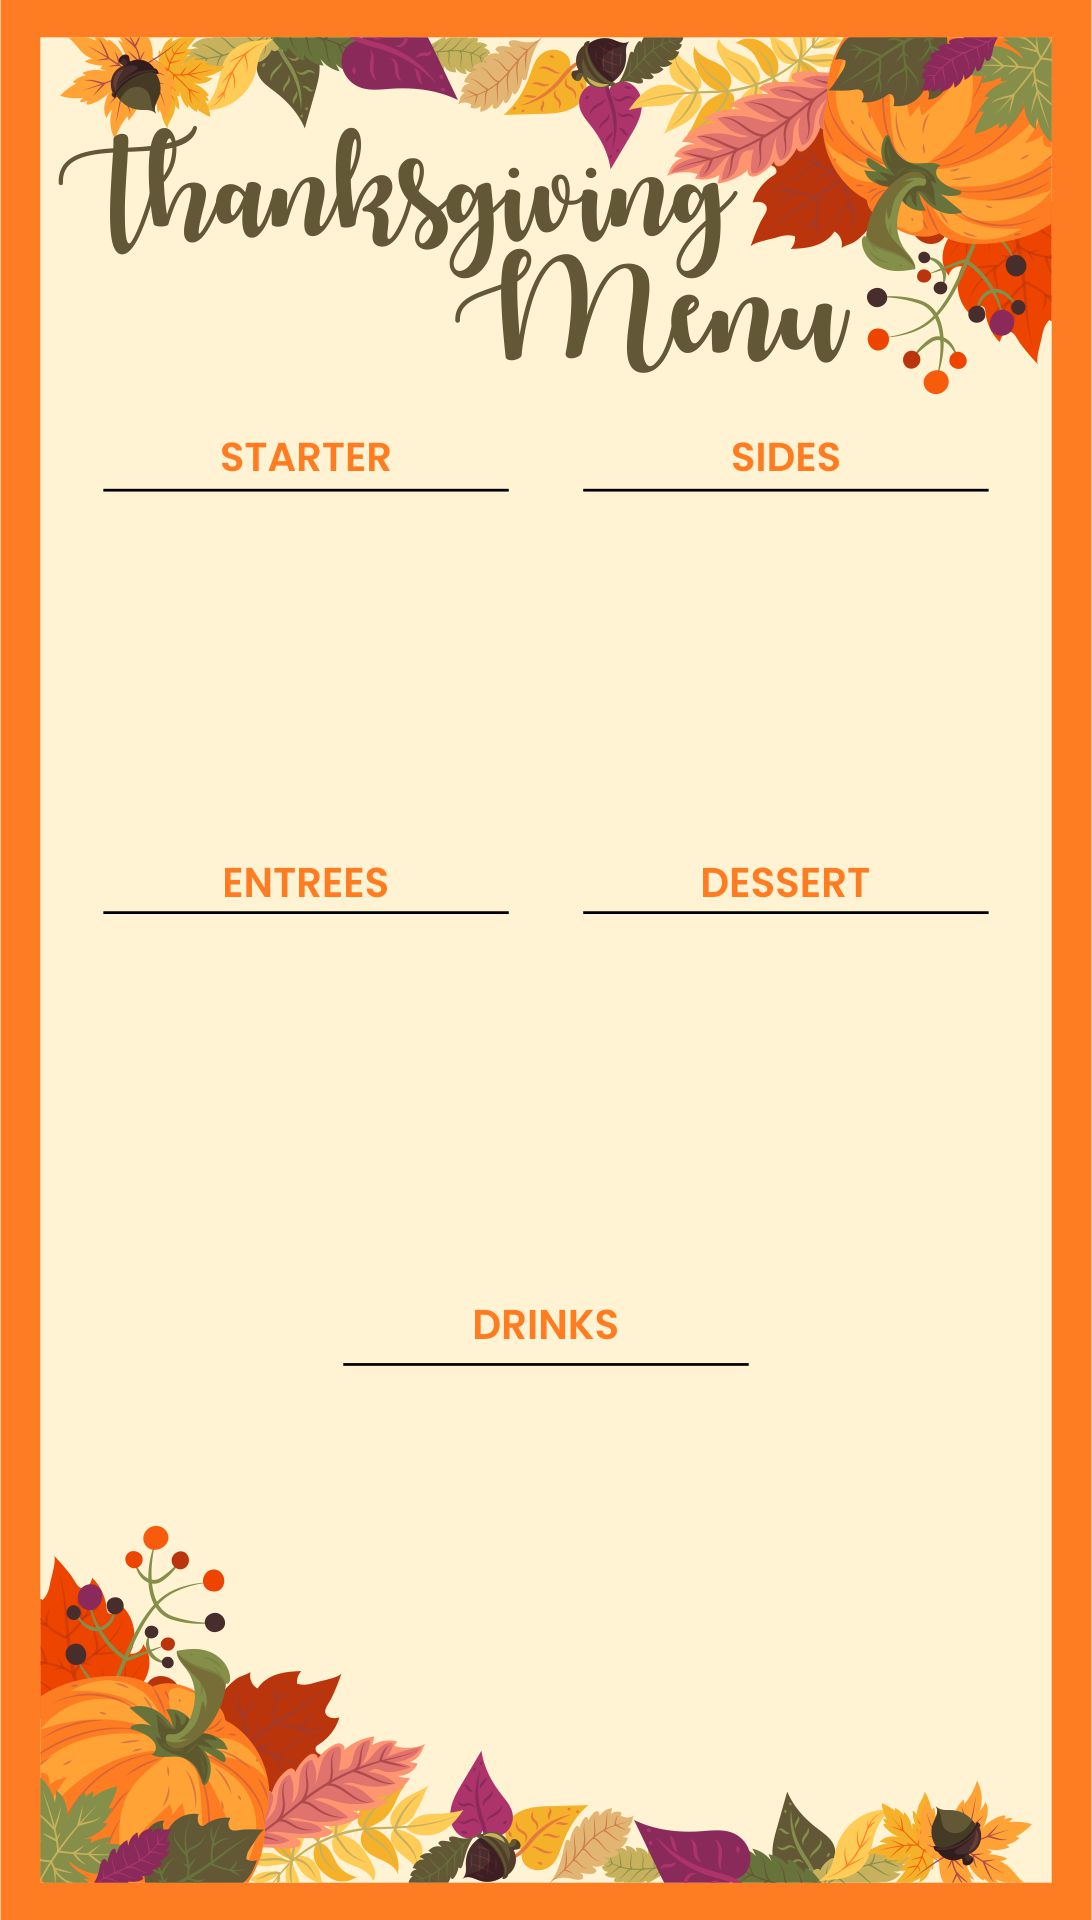 8 Best Images of Free Printable Thanksgiving Menu Templates